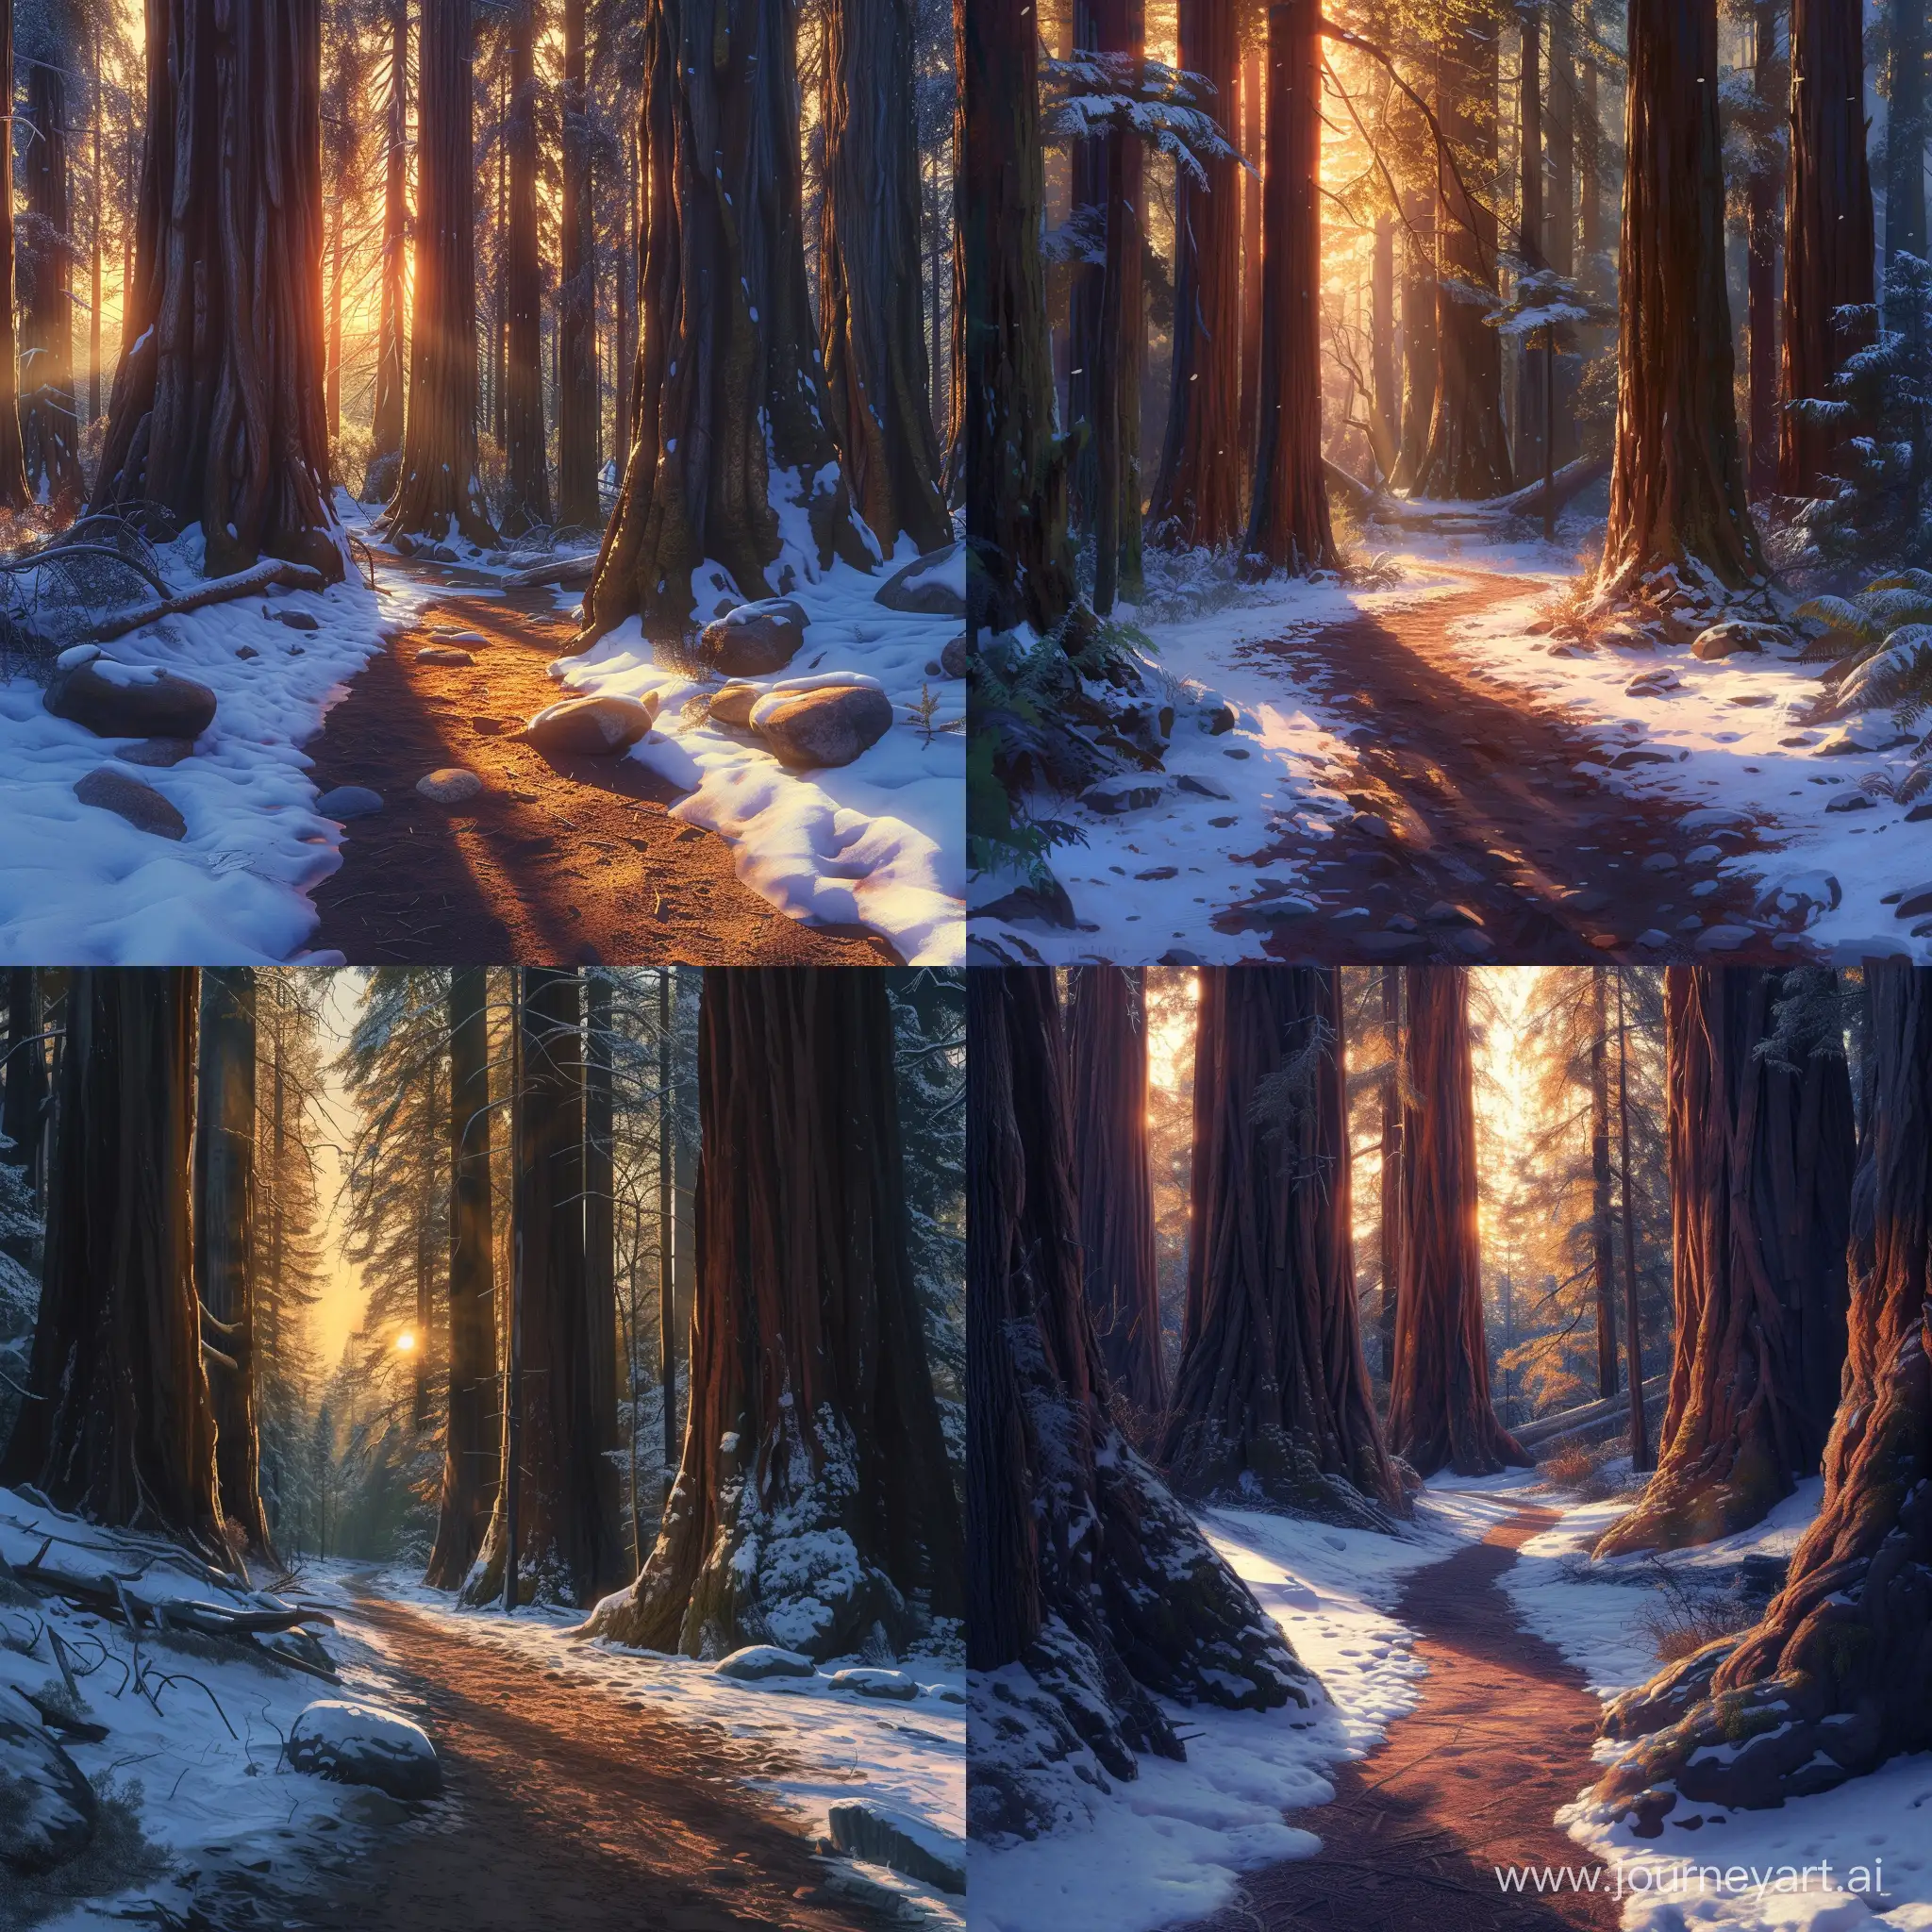 Samuel p. taylor state park, dirt path, massive redwoods, Ice and snow, snow rocks, sunset,  hyperdetailed, erin hanson, george inness, nicolas de stael, cinematic lighting, long shadows, saturated contrast. video game cover art.